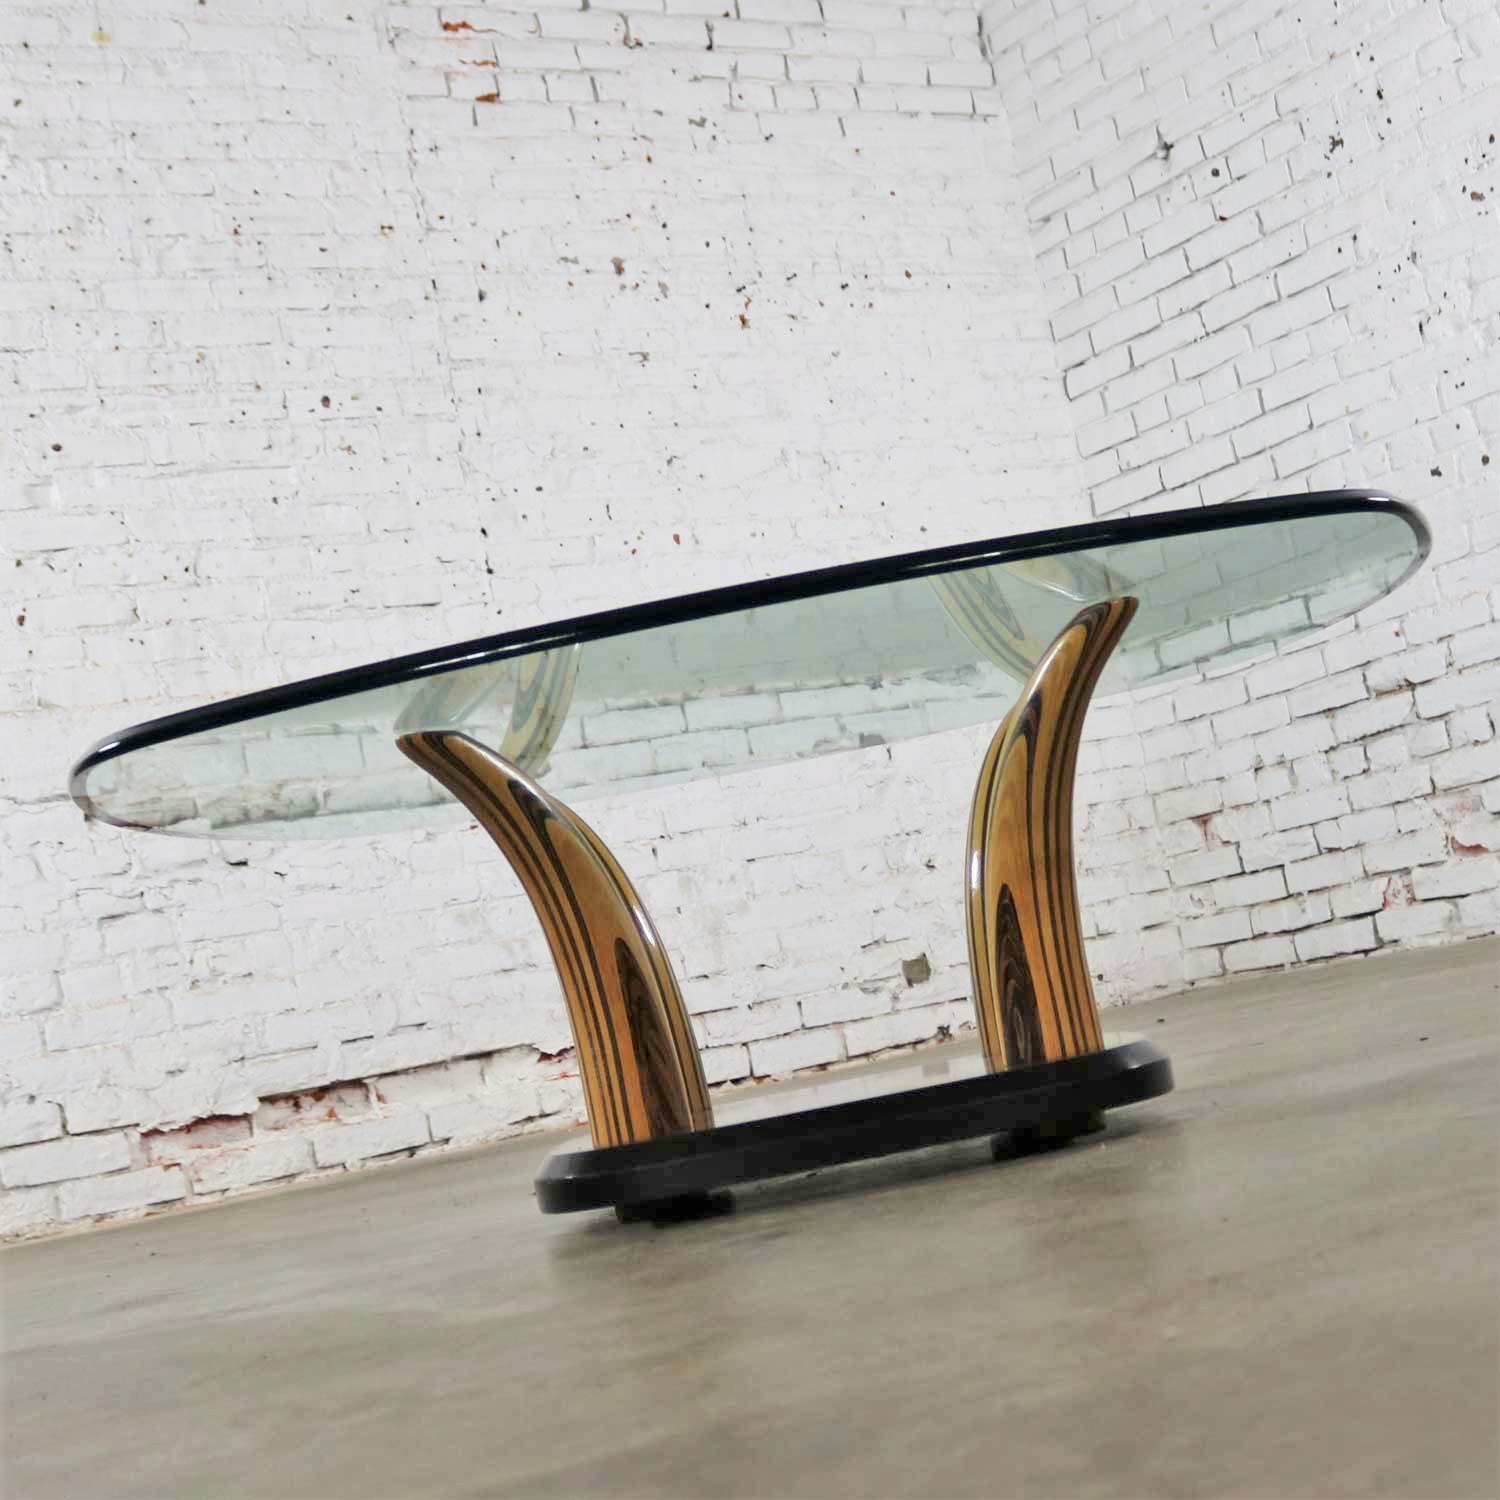 Henredon Zebra Wood Faux Tusk Coffee or Cocktail Table with Glass Top